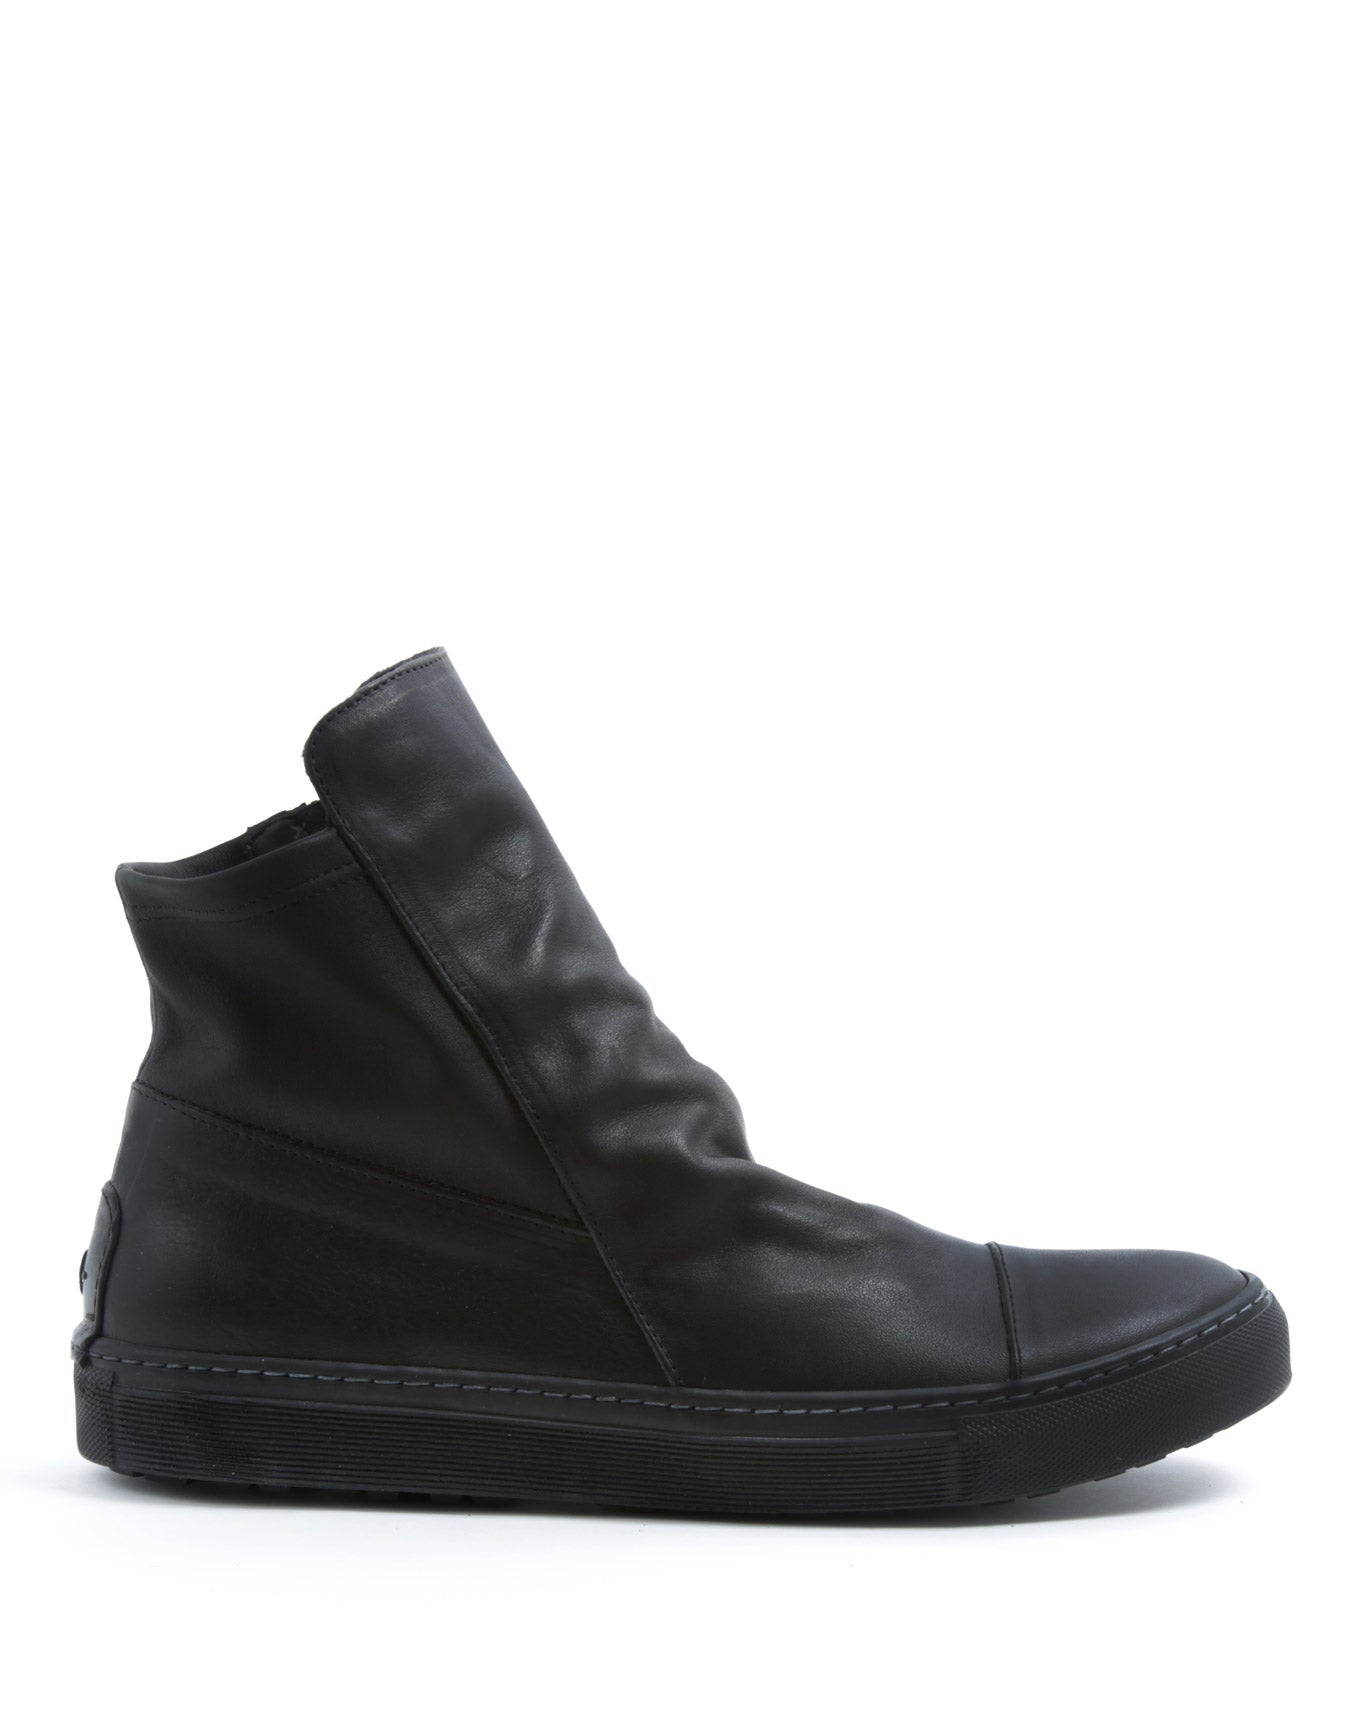 FIORENTINI + BAKER, BOLT BRET, Sneaker boots for all year-round that combines style and comfort. Handcrafted by skilled artisans. Made in Italy. Made to last.